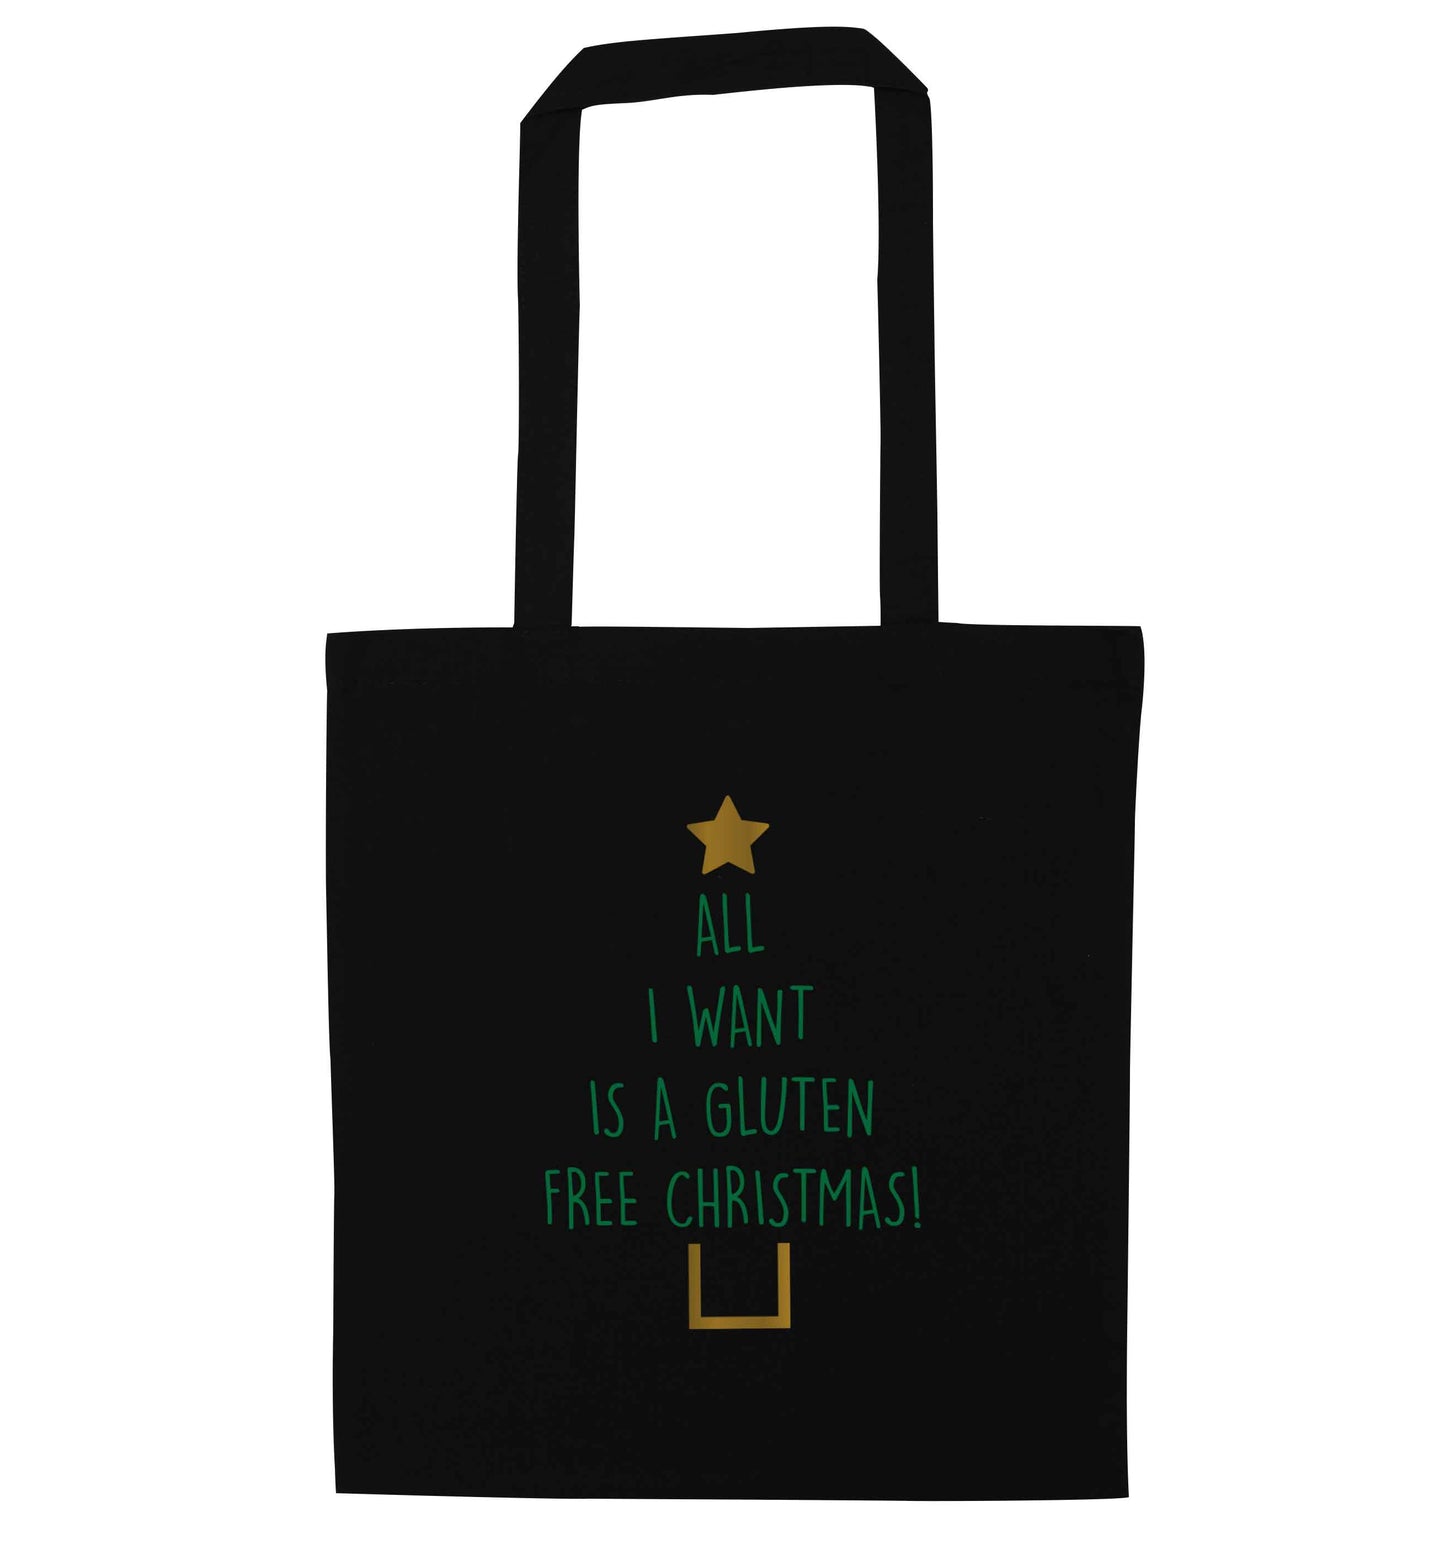 All I want is a gluten free Christmas black tote bag